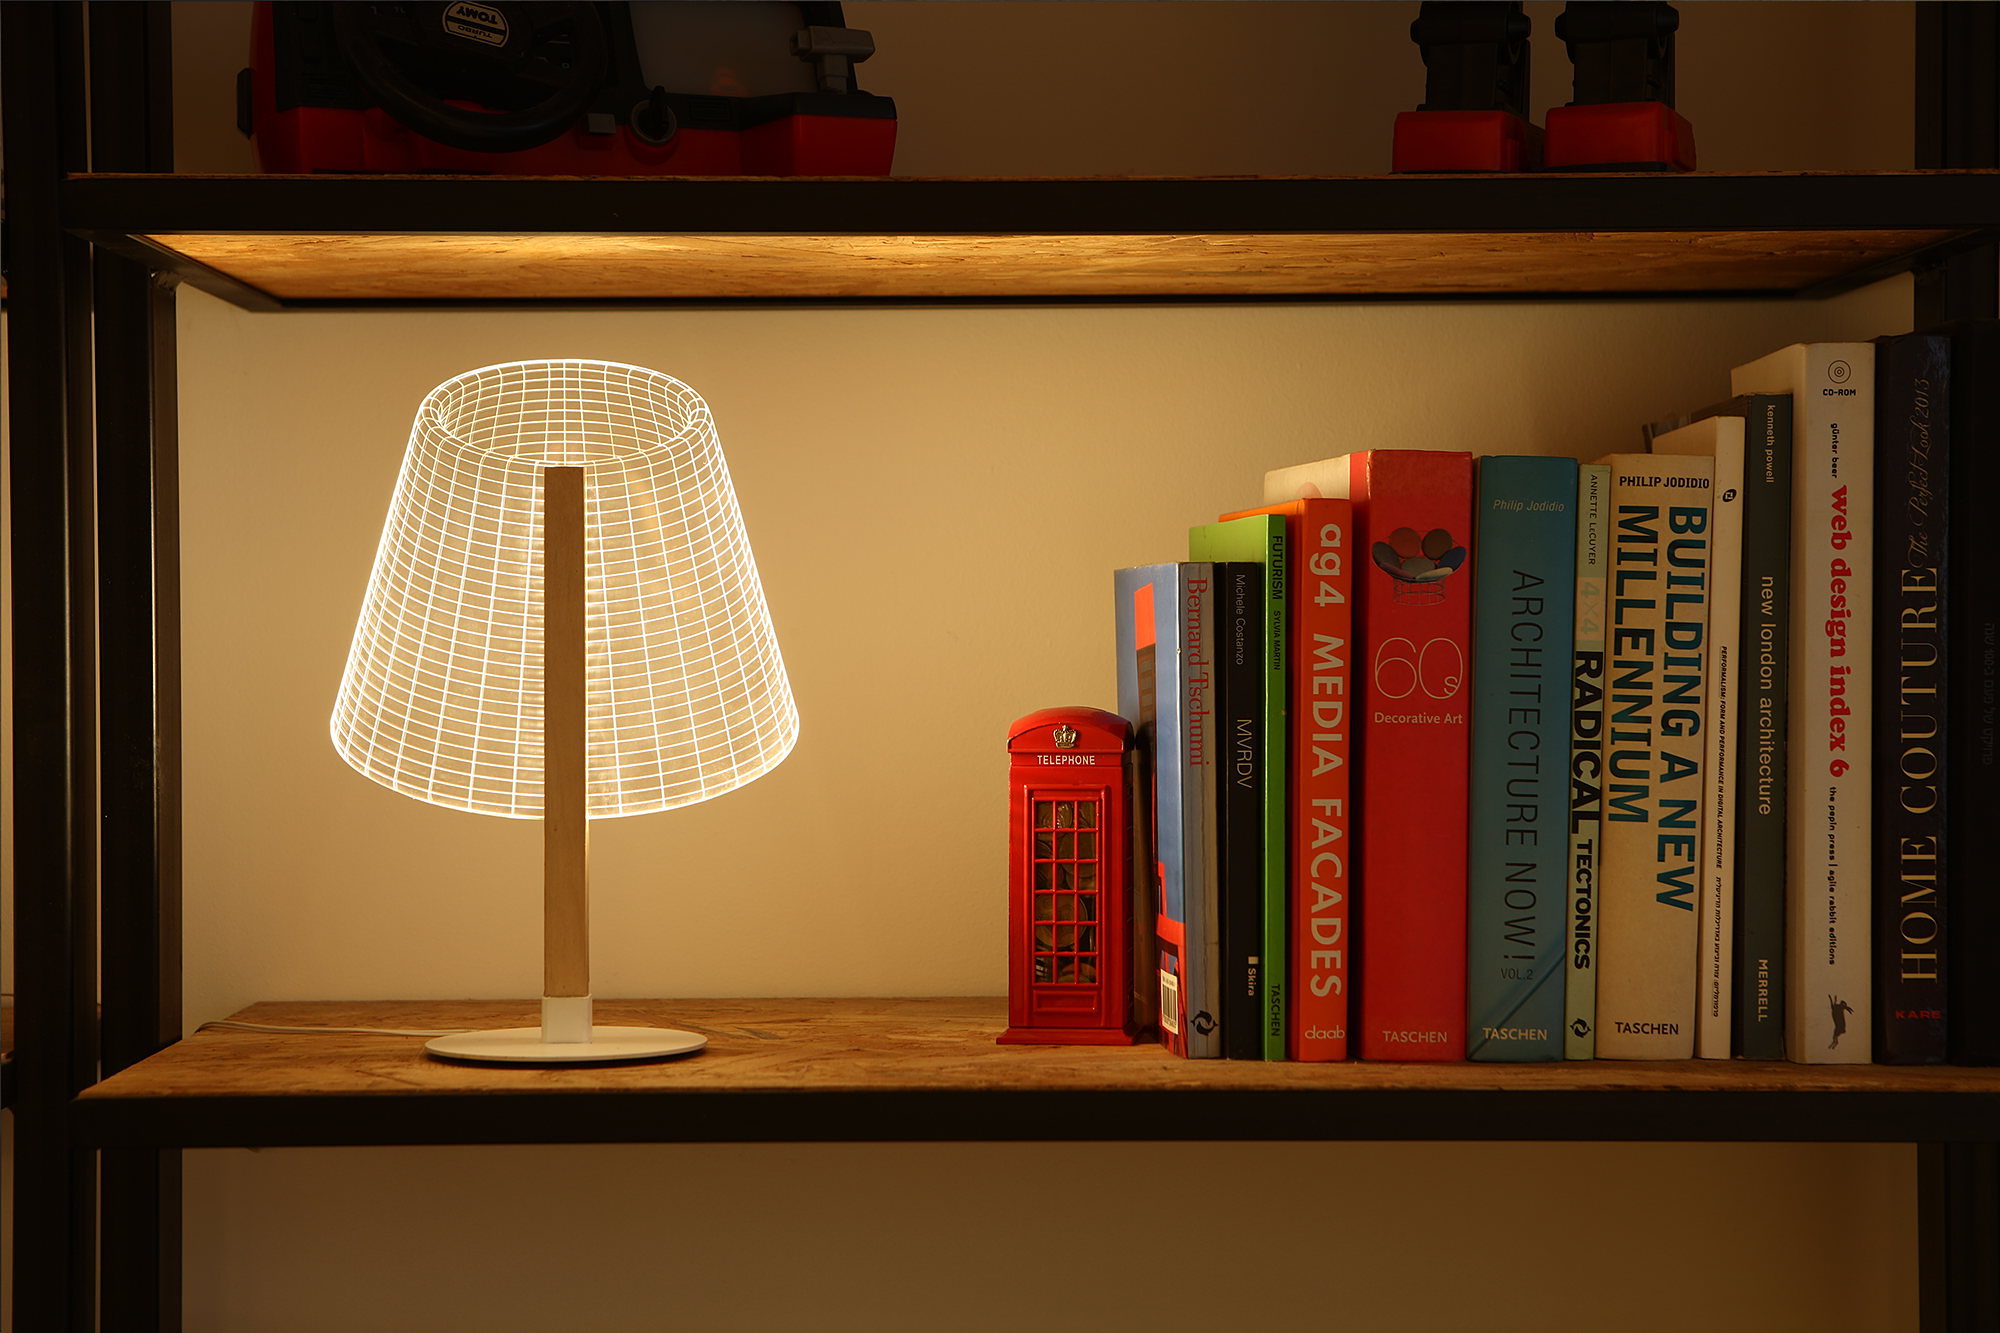 The new version of the Bulbing lamp with 3D-effect by Nir Chehanowski ClASSi 2